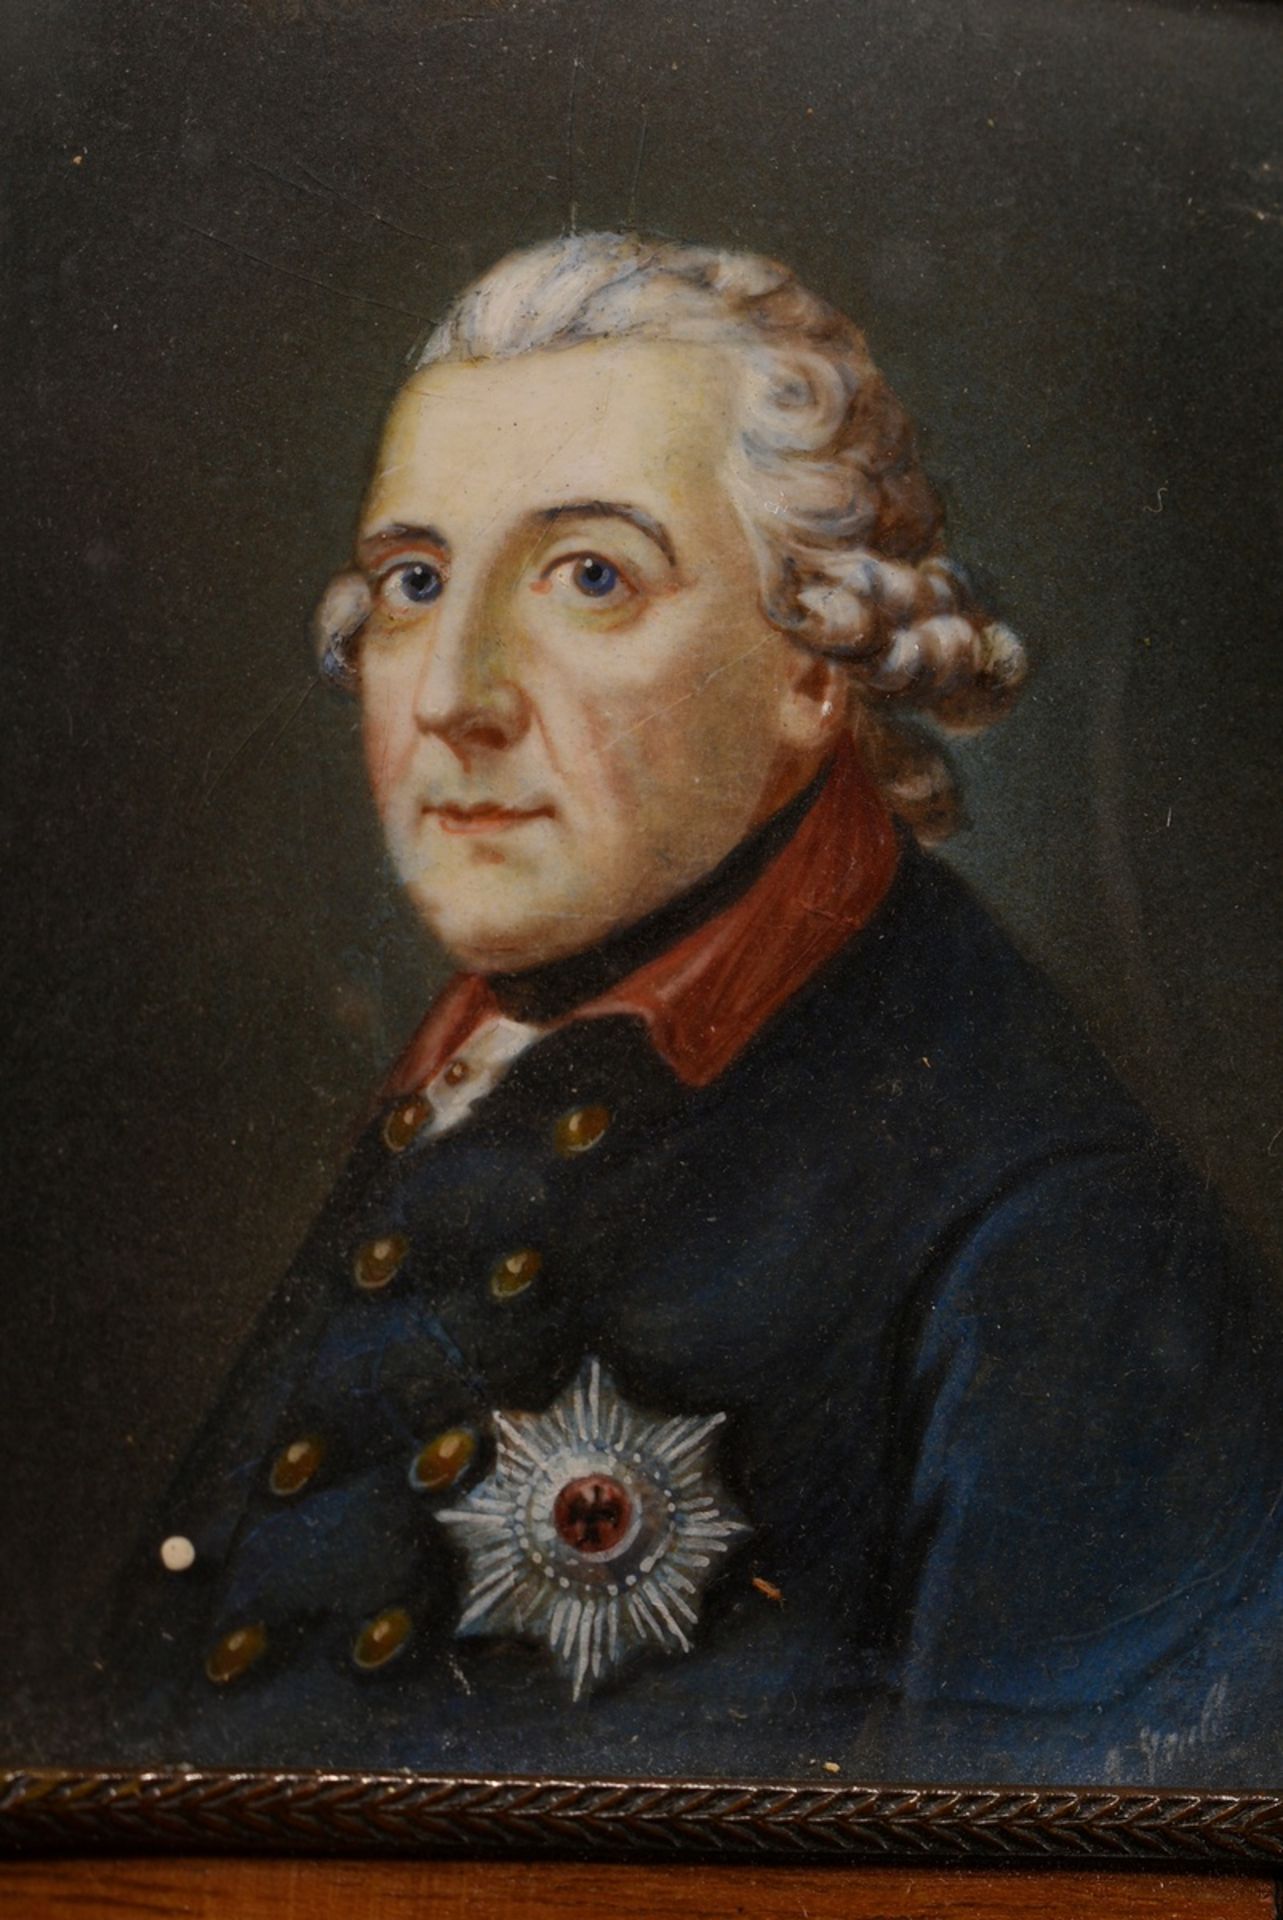 Miniature "Friedrich der Große" (Frederick the Great) after a painting by Anton Graff (c. 1781/86), - Image 3 of 5